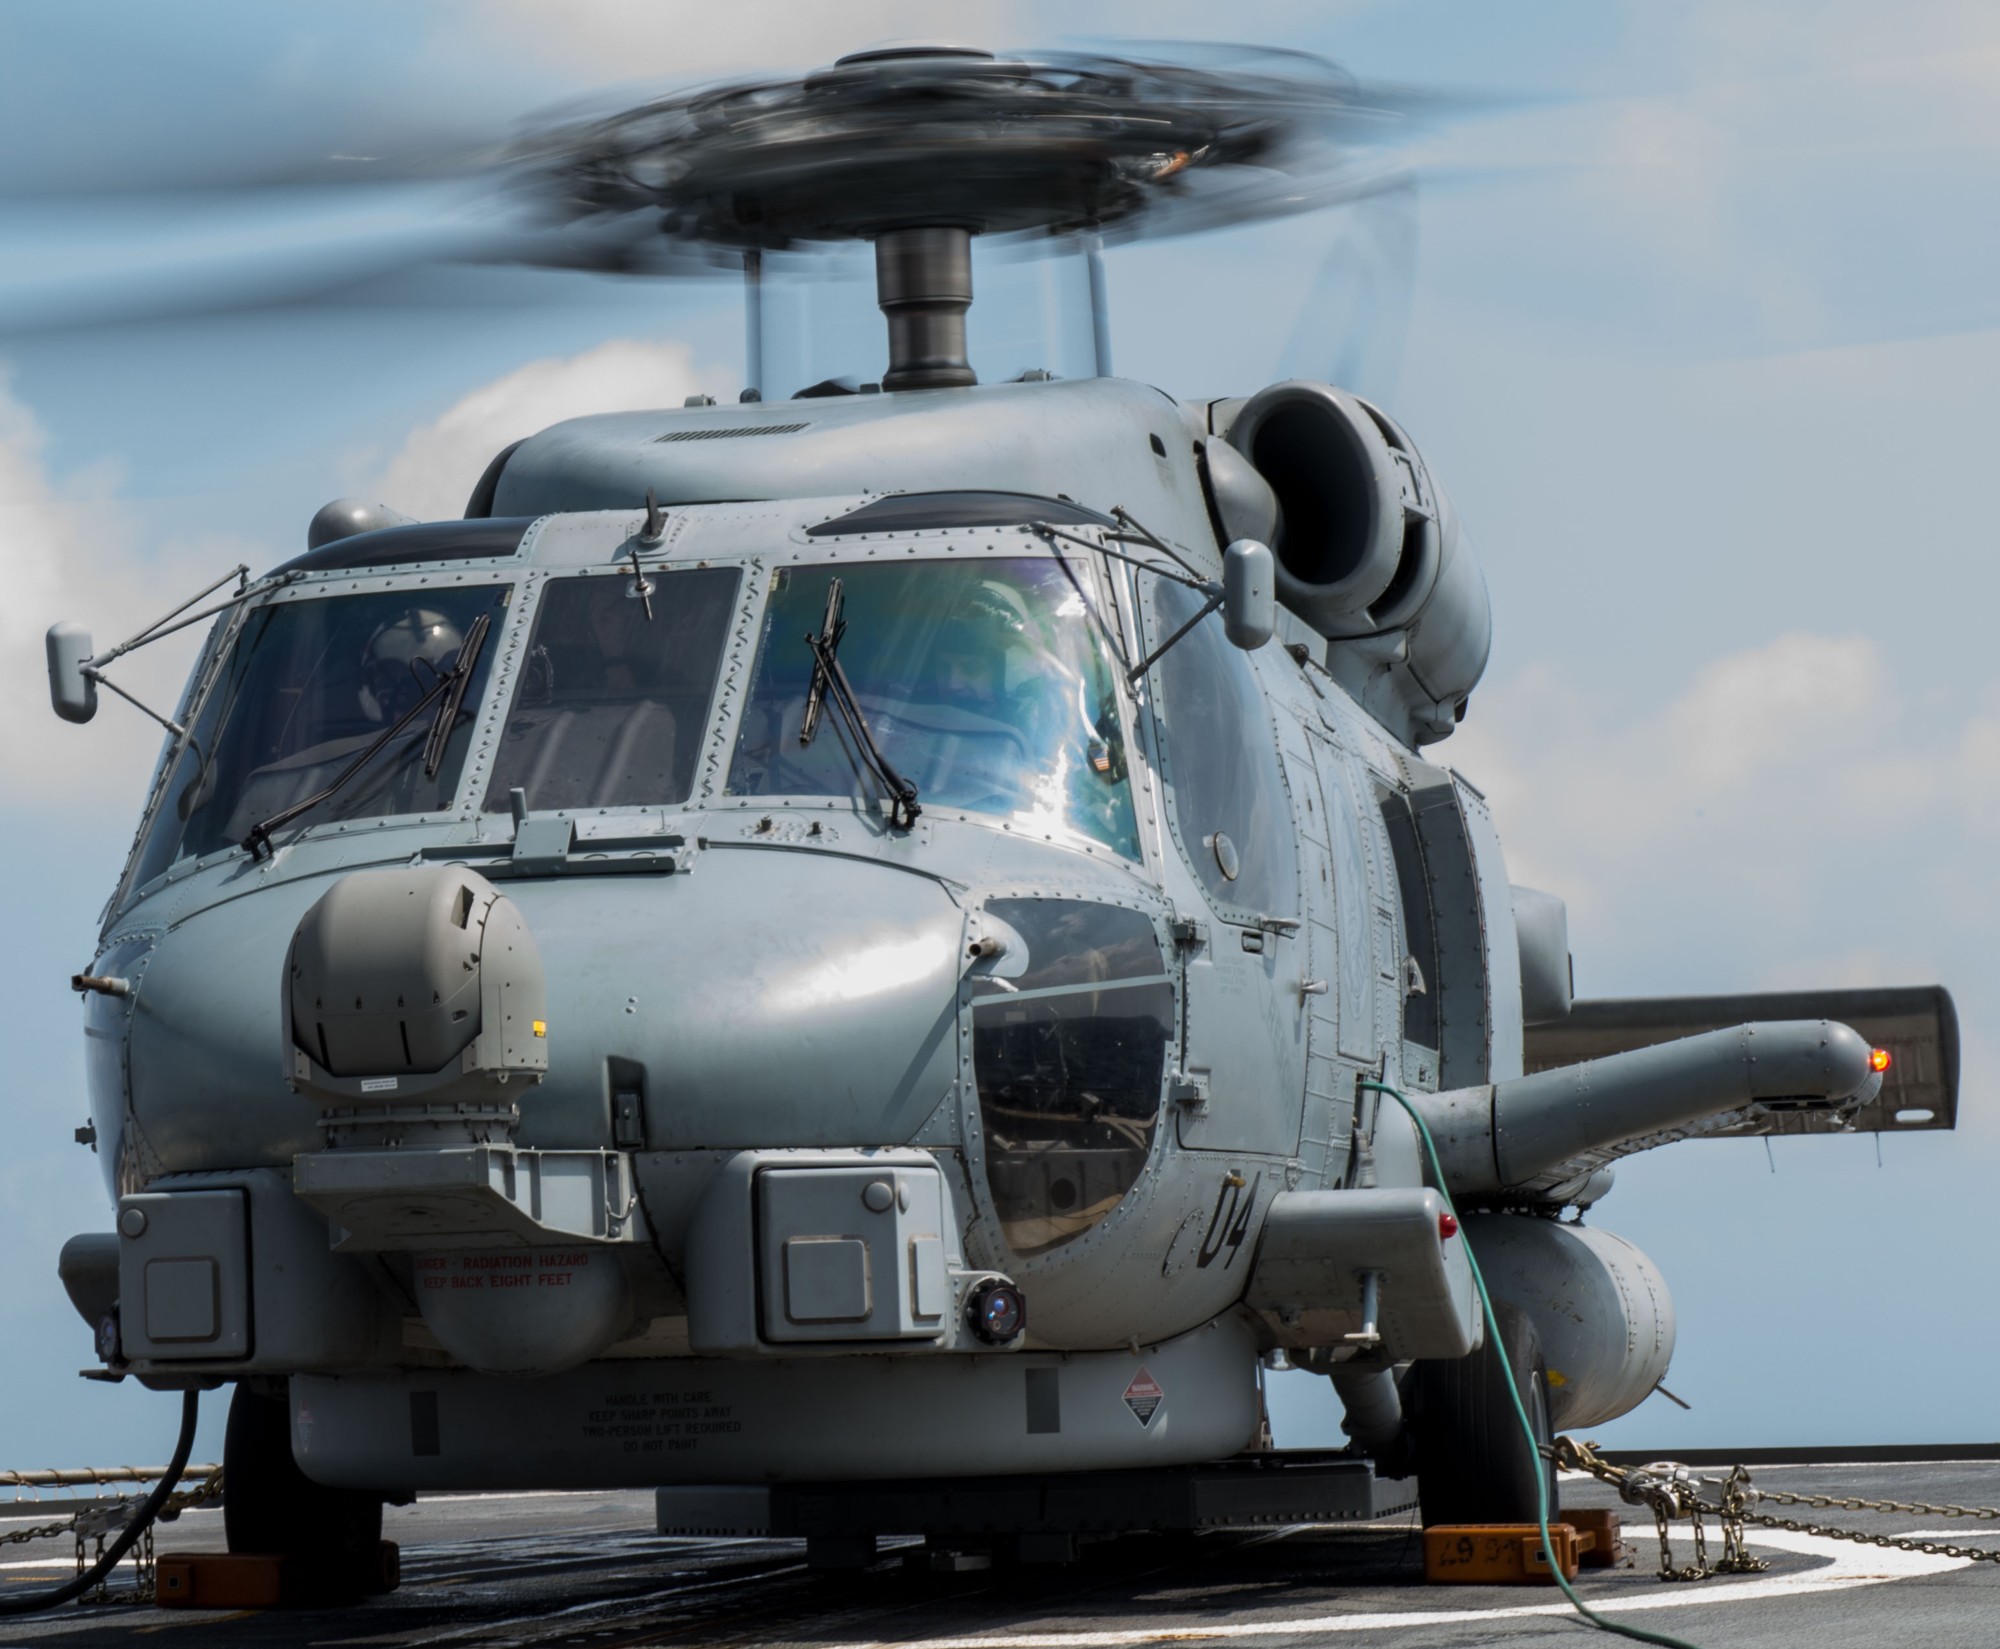 hsm-51 warlords helicopter maritime strike squadron mh-60r seahawk navy 2015 54